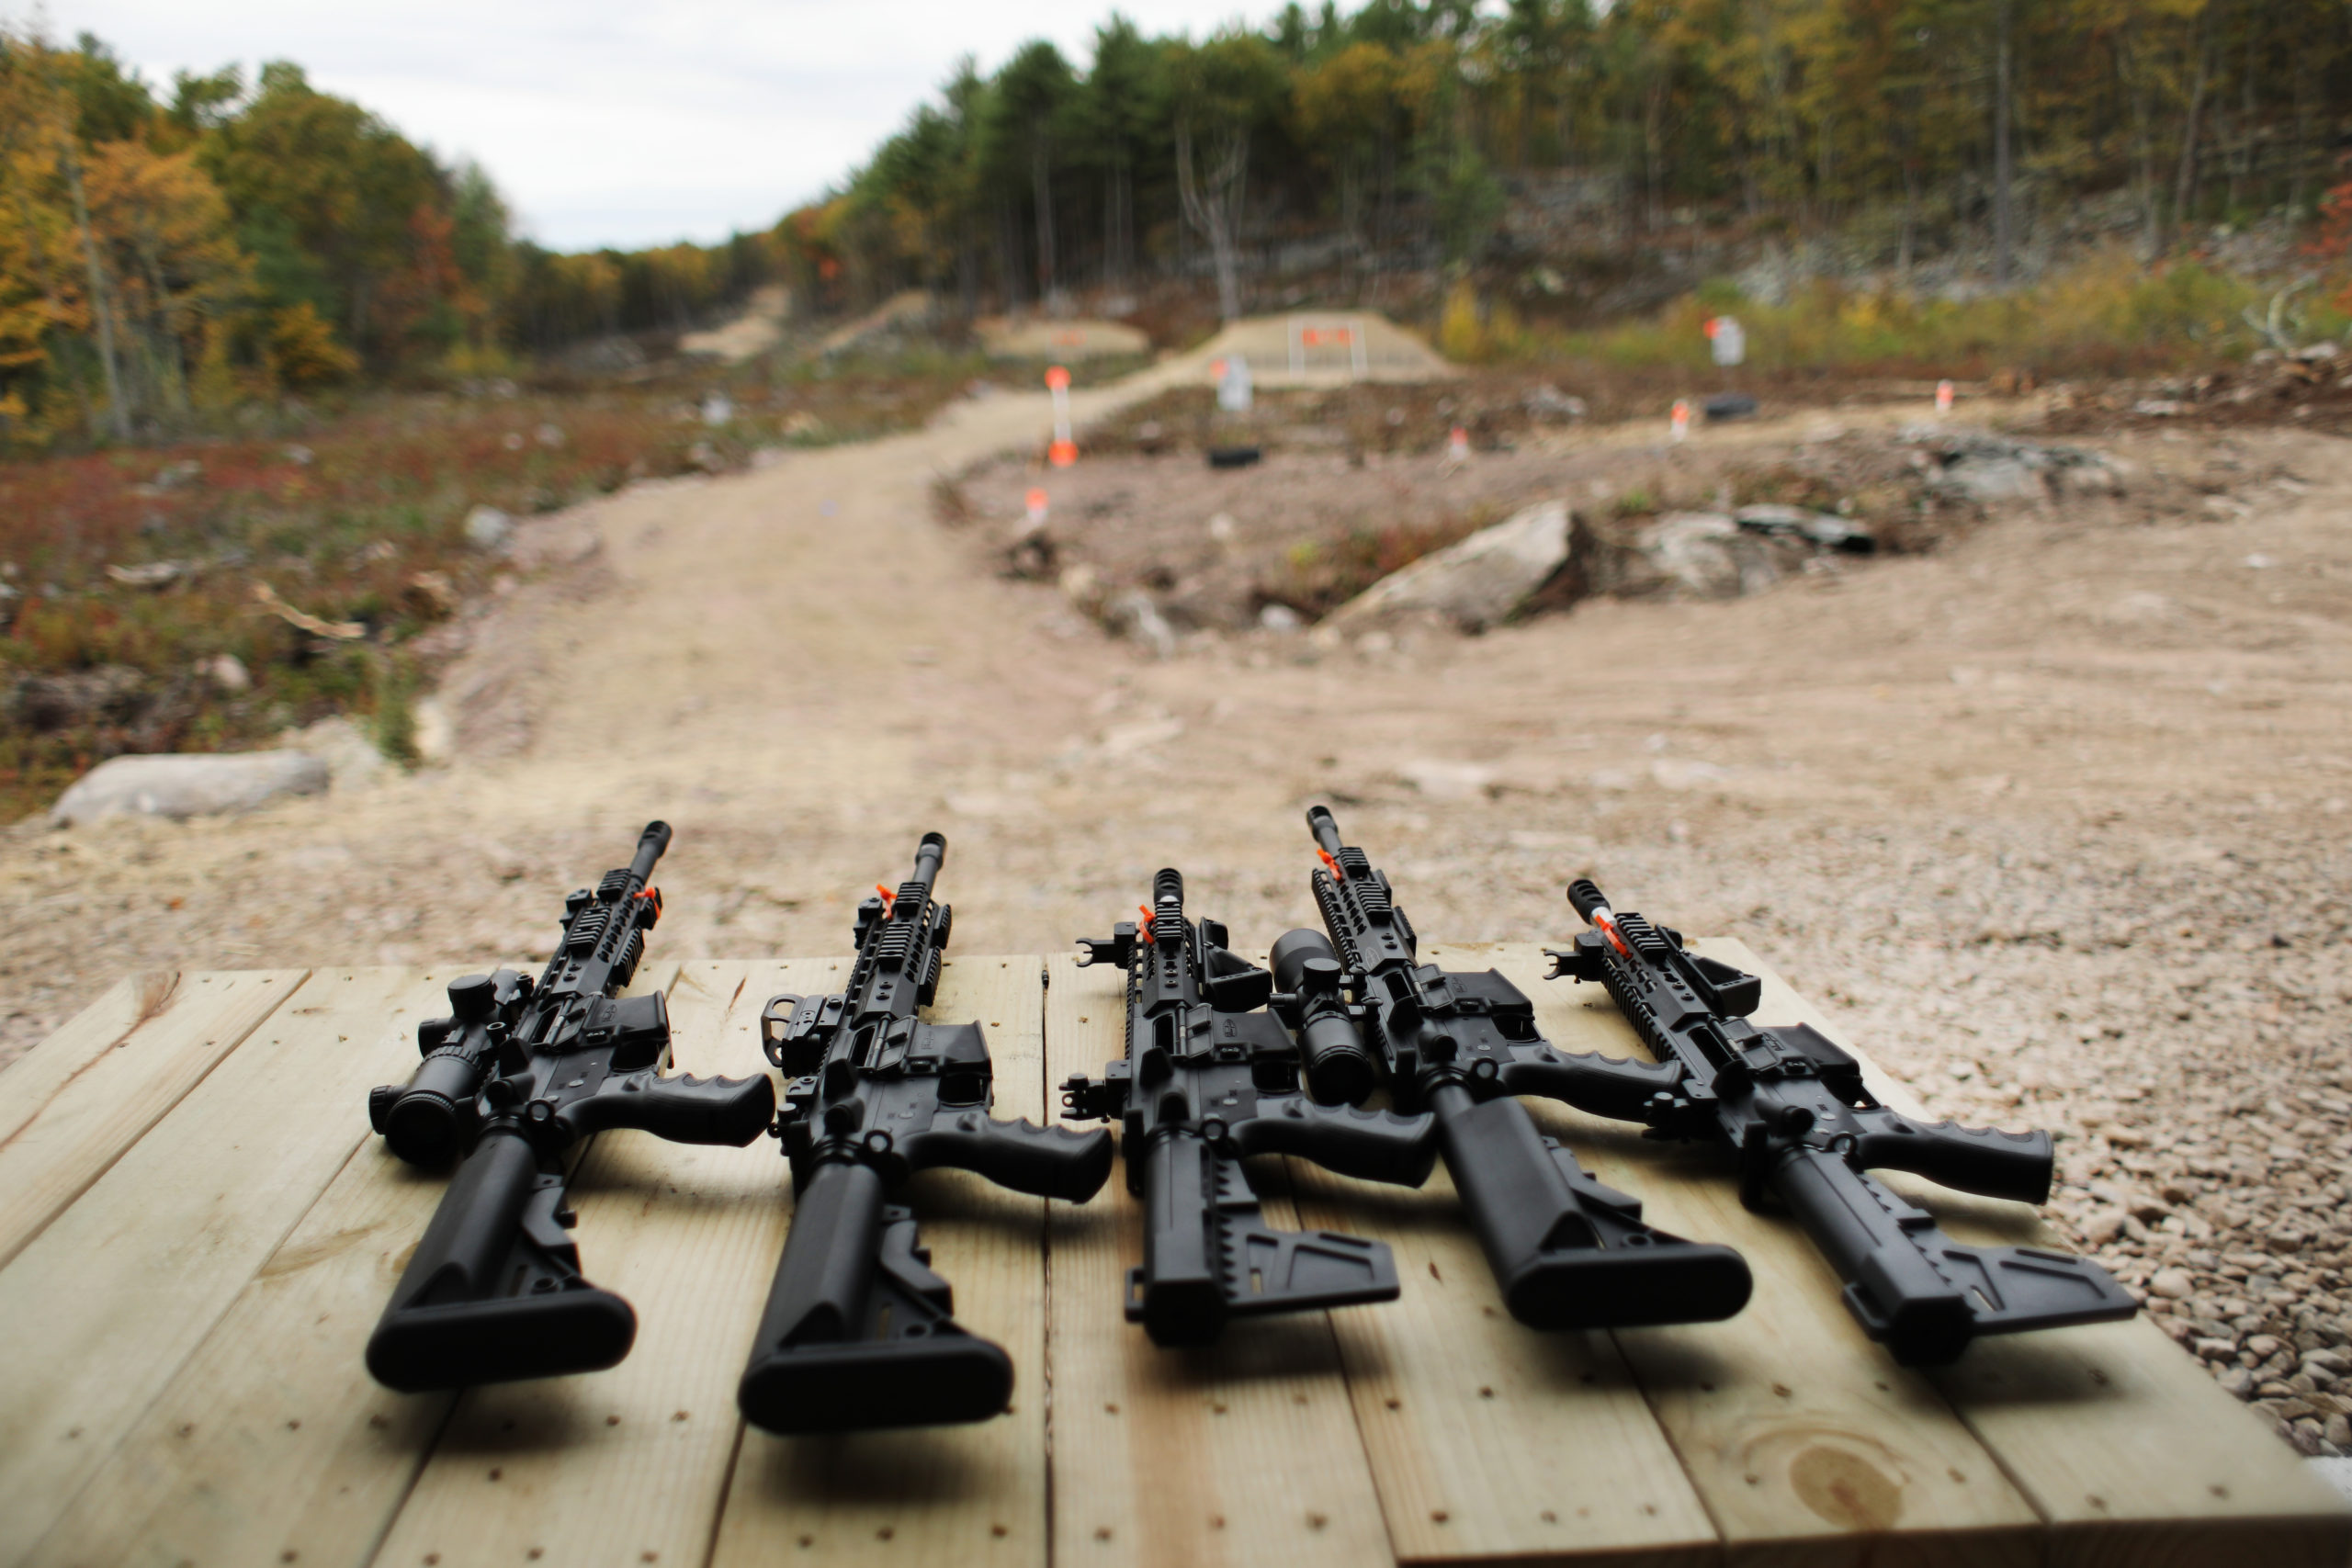 GREELEY, PENNSYLVANIA - OCTOBER 12: AR-15 rifles and other weapons are displayed on a table at a shooting range during the “Rod of Iron Freedom Festival” on October 12, 2019 in Greeley, Pennsylvania. The two-day event, which is organized by Kahr Arms/Tommy Gun Warehouse and Rod of Iron Ministries, has billed itself as a “second amendment rally and celebration of freedom, faith and family.” Numerous speakers, vendors and displays celebrated guns and gun culture in America. (Spencer Platt/Getty Images)